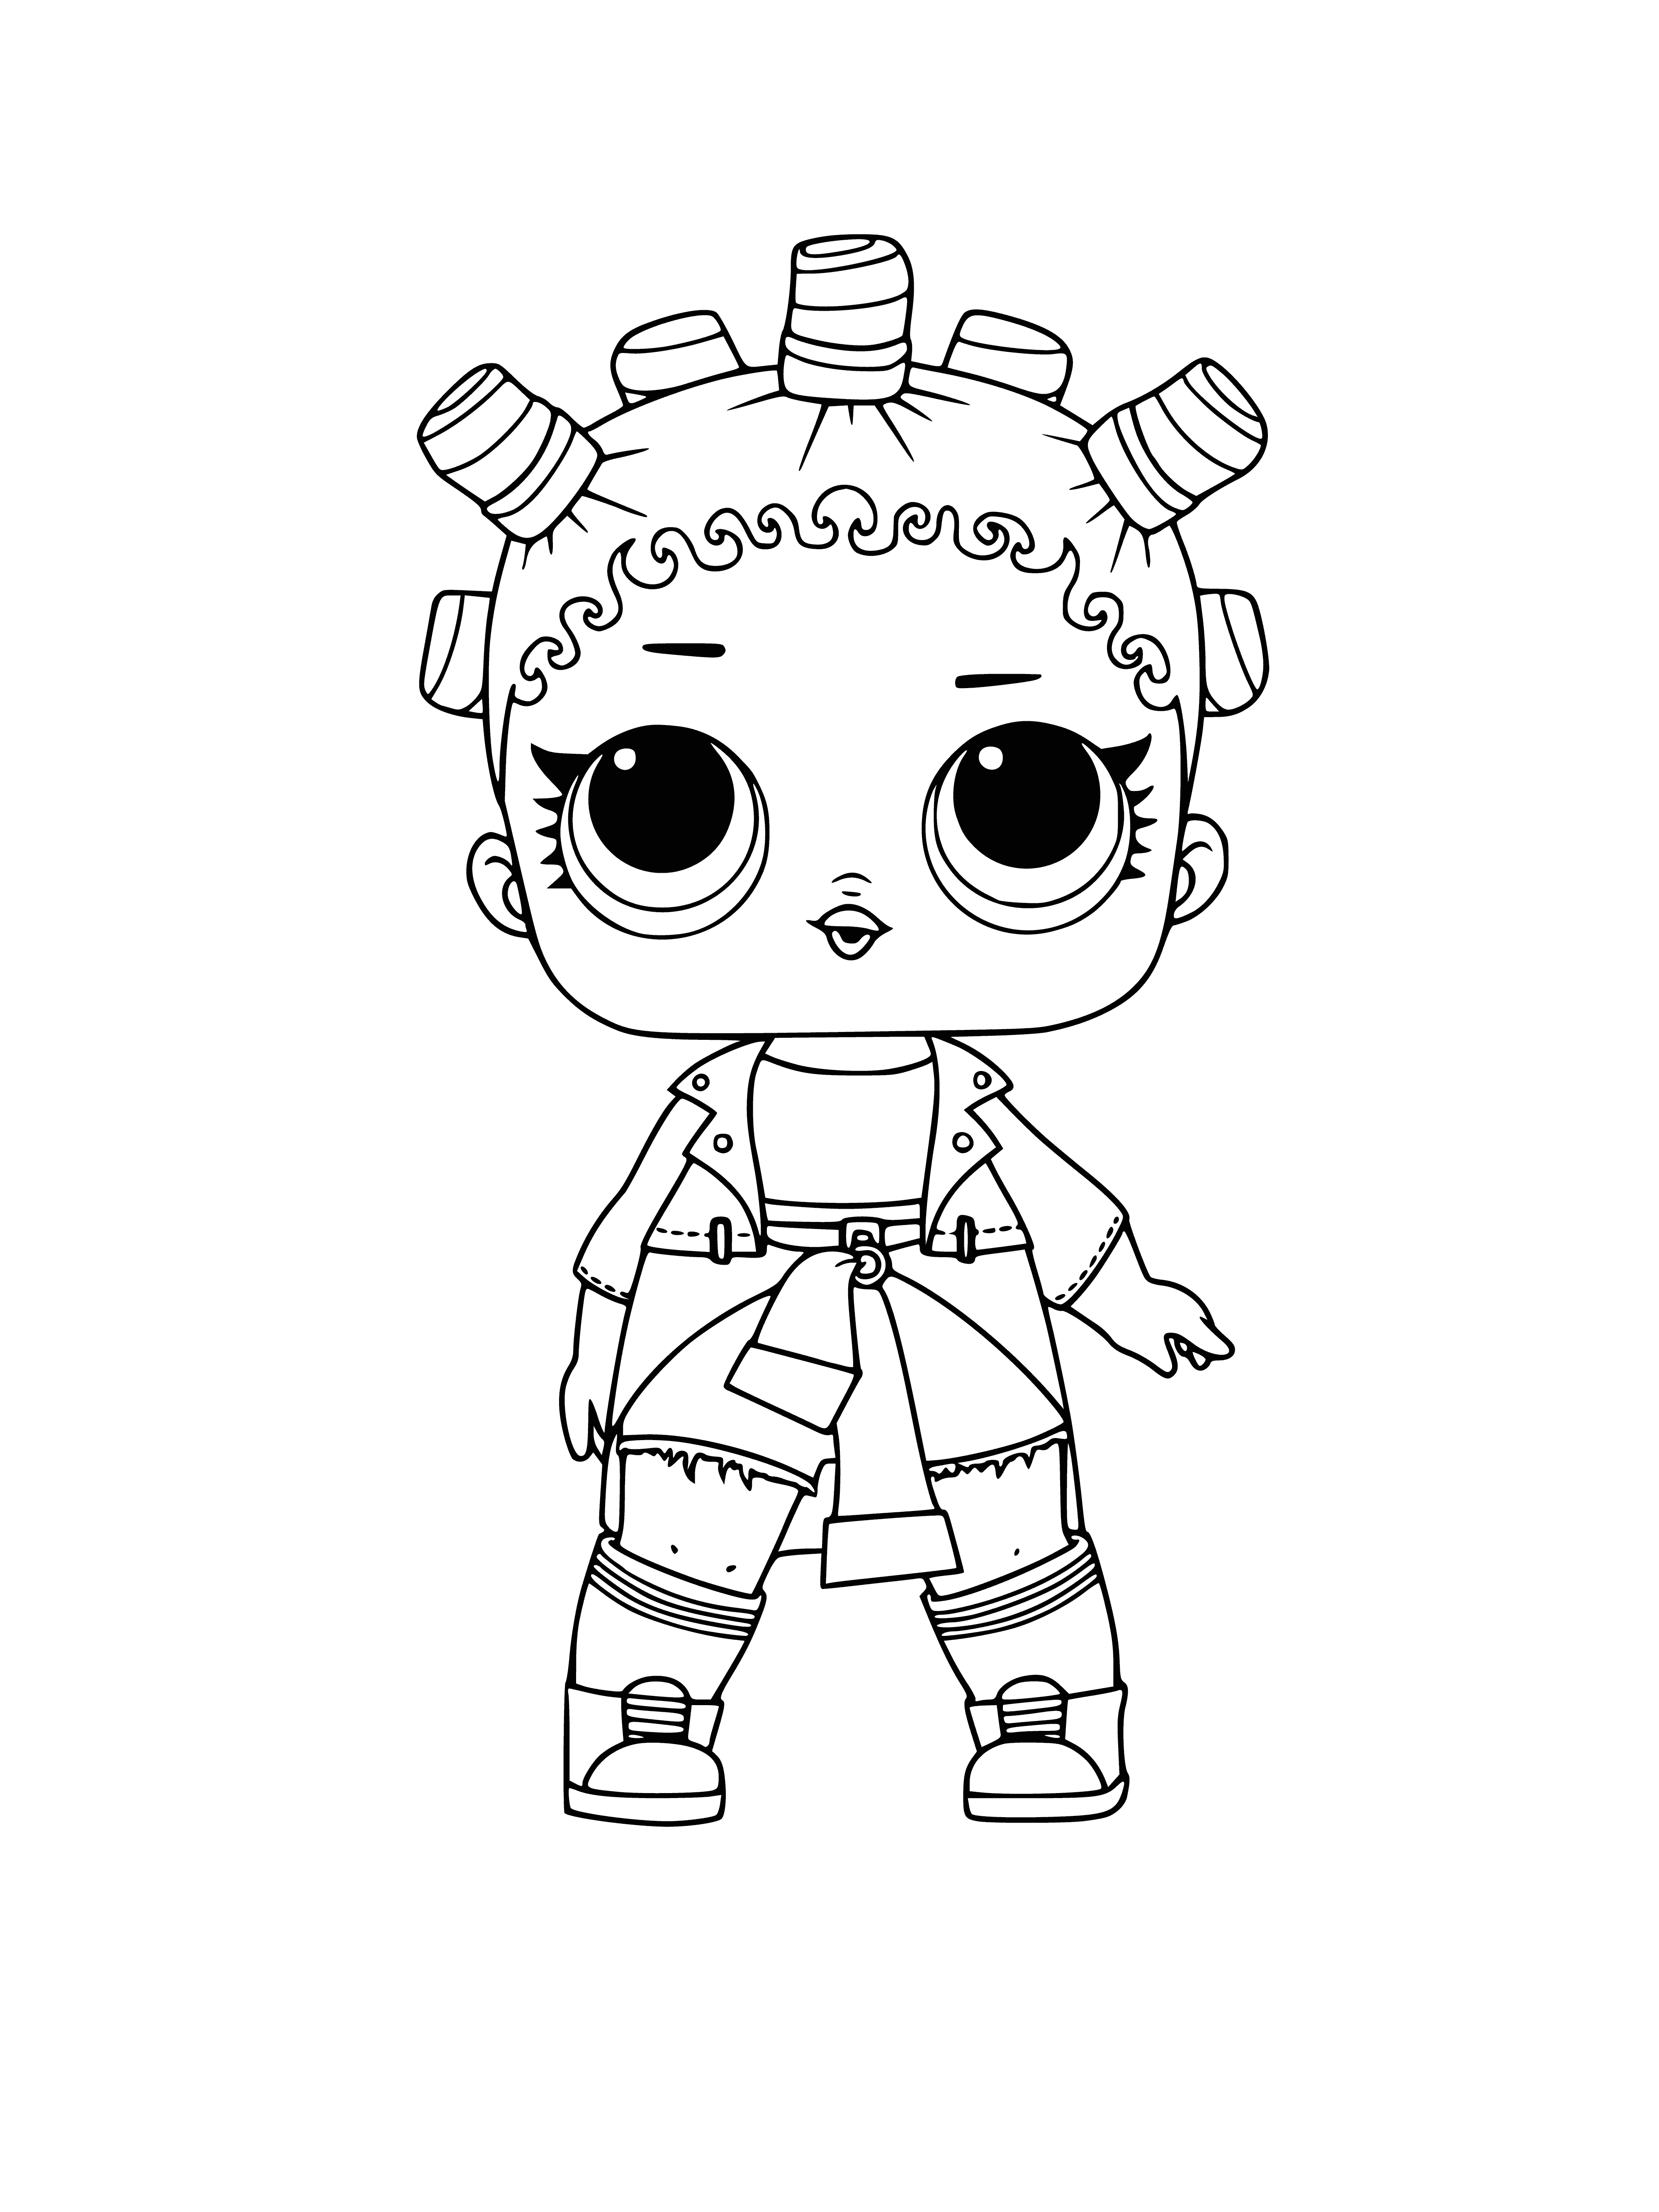 coloring page: 4 L.O.L. dolls of different colors and hairstyles standing on a white surface, each wearing matching outfit/shoes/socks.